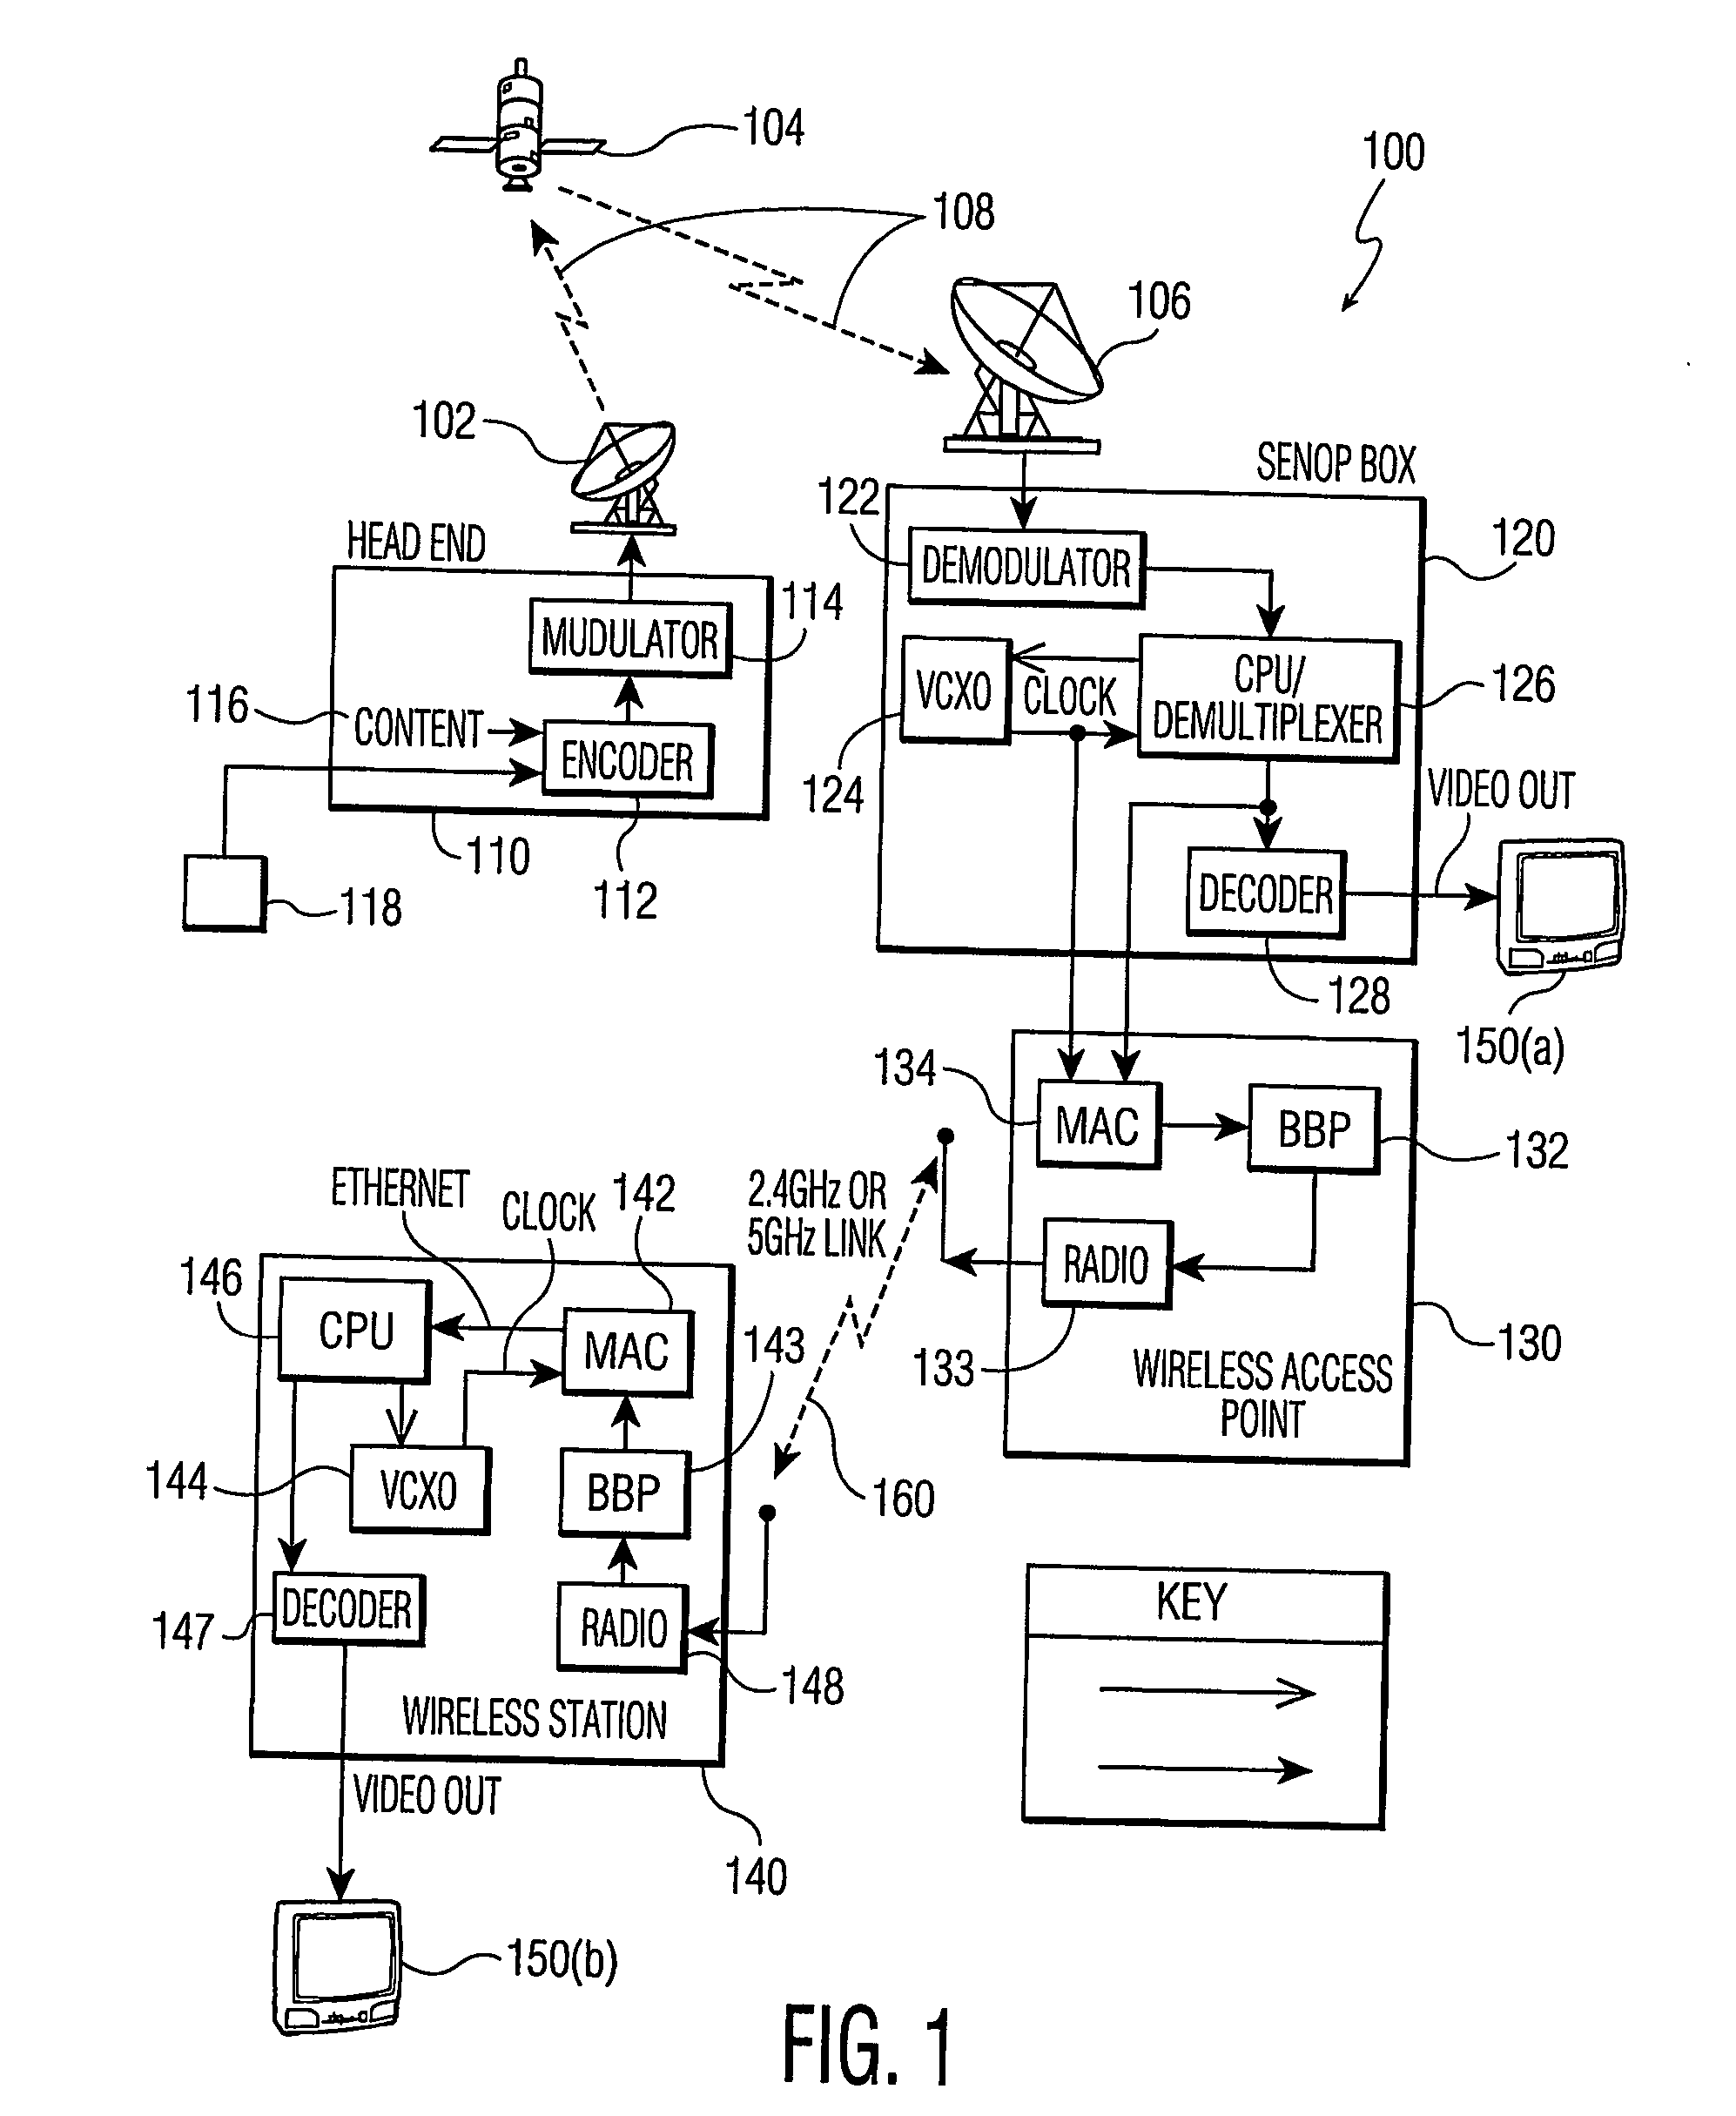 Method and apparatus for bandwidth provisioning in a wlan